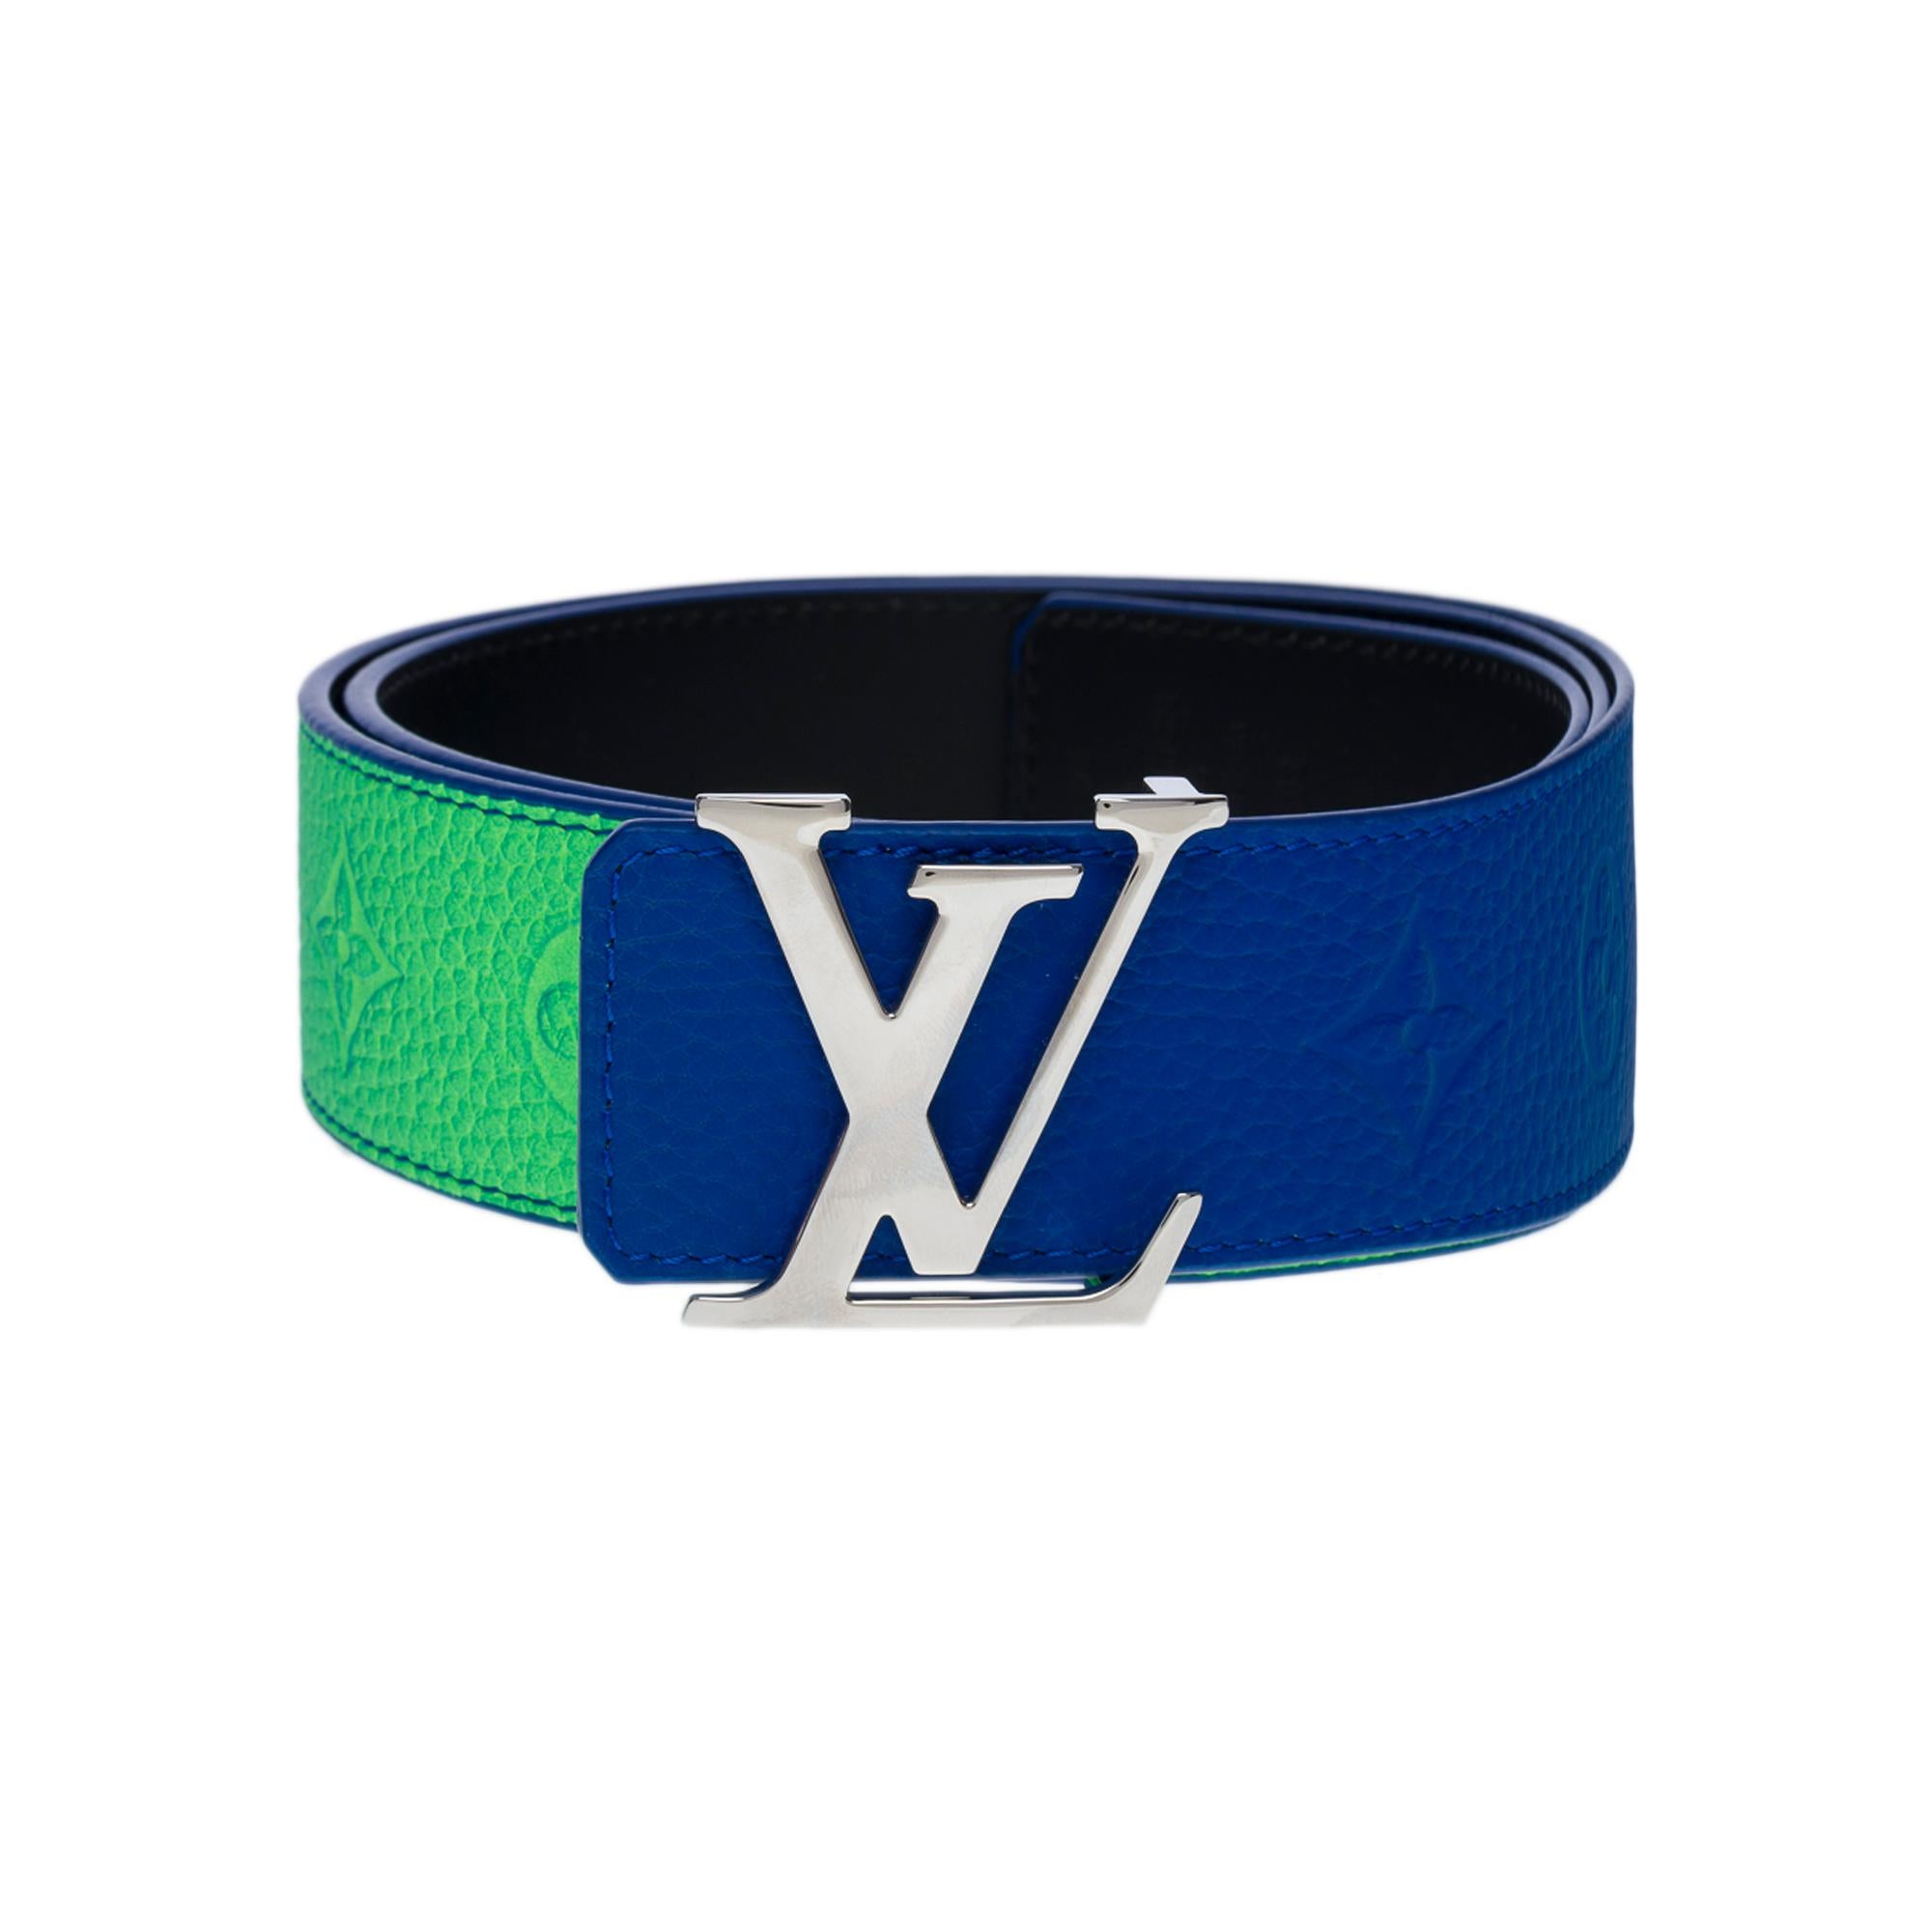 SOLD OUT

This 40mm blue and green LV Initiales Taurillon Illusion belt exemplifies the refined craftsmanship and bold spirit of the House. The reversible strap features an embossed Monogram pattern with a sprayed effect for a contemporary look.